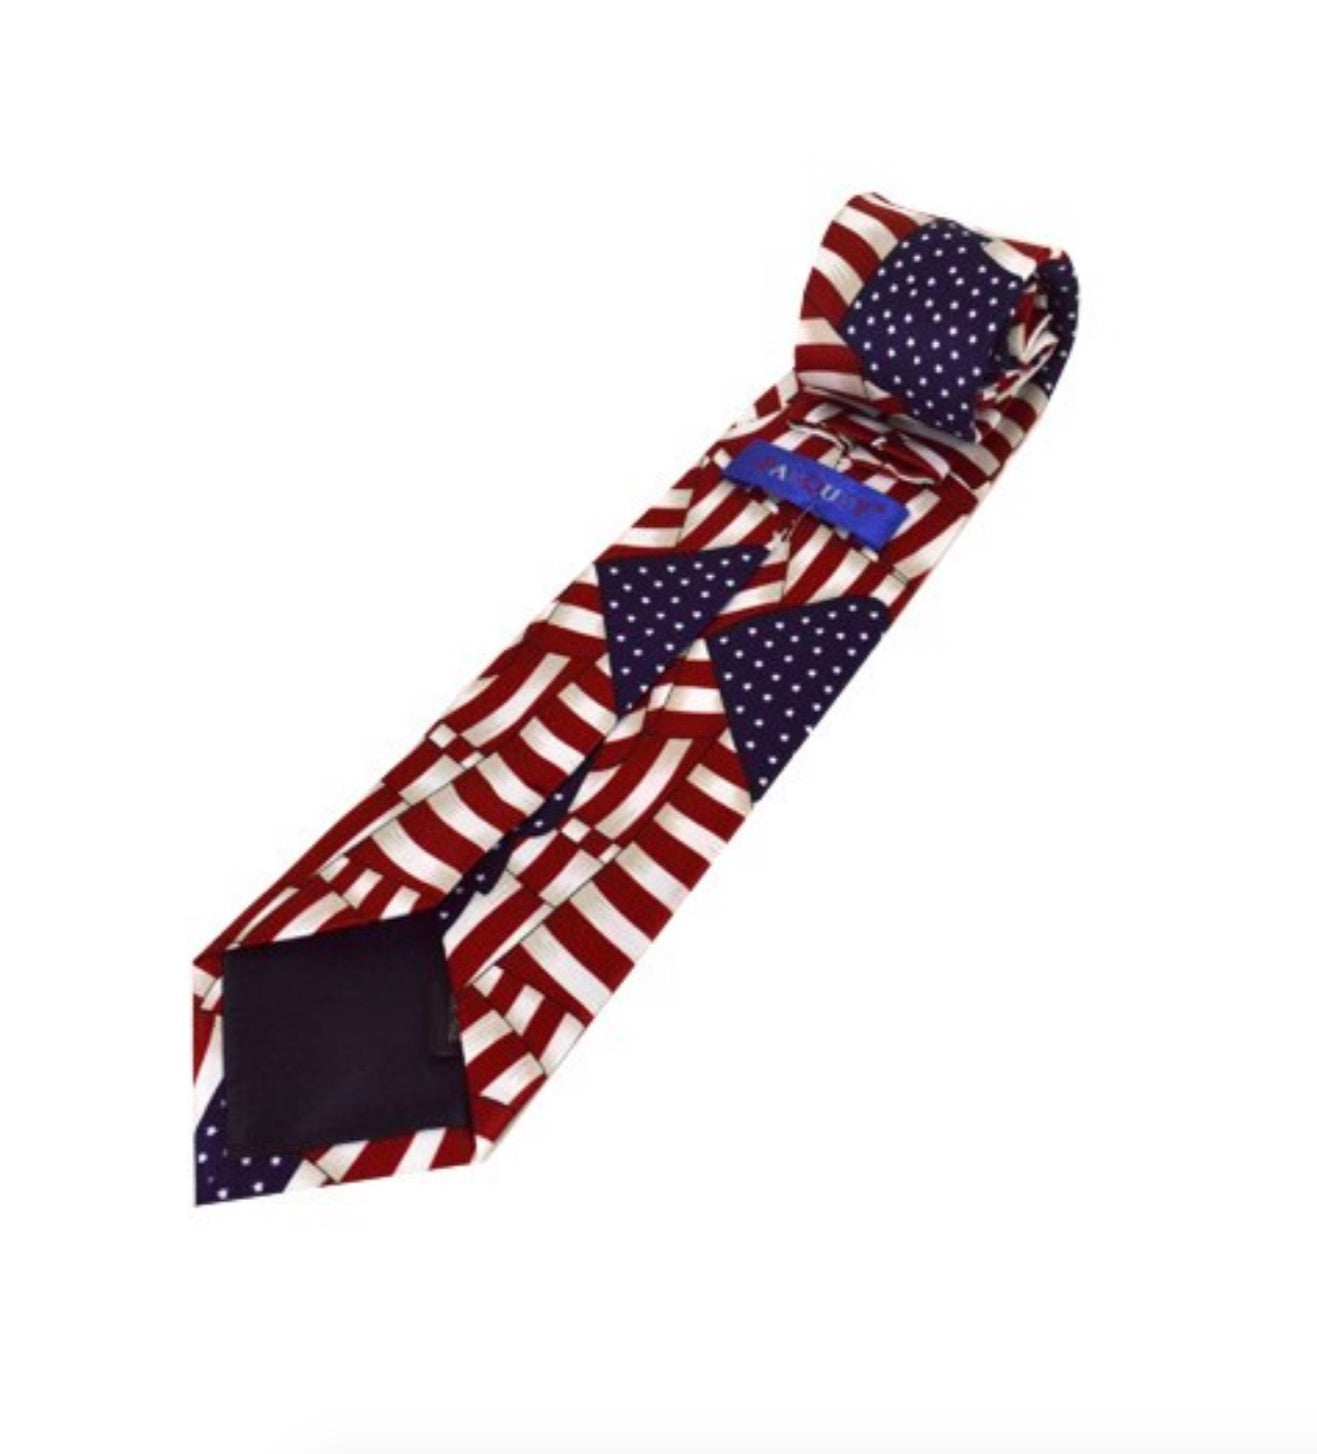 Parquet Men's Novelty Fashion Neckties with Gift Box (Flags)